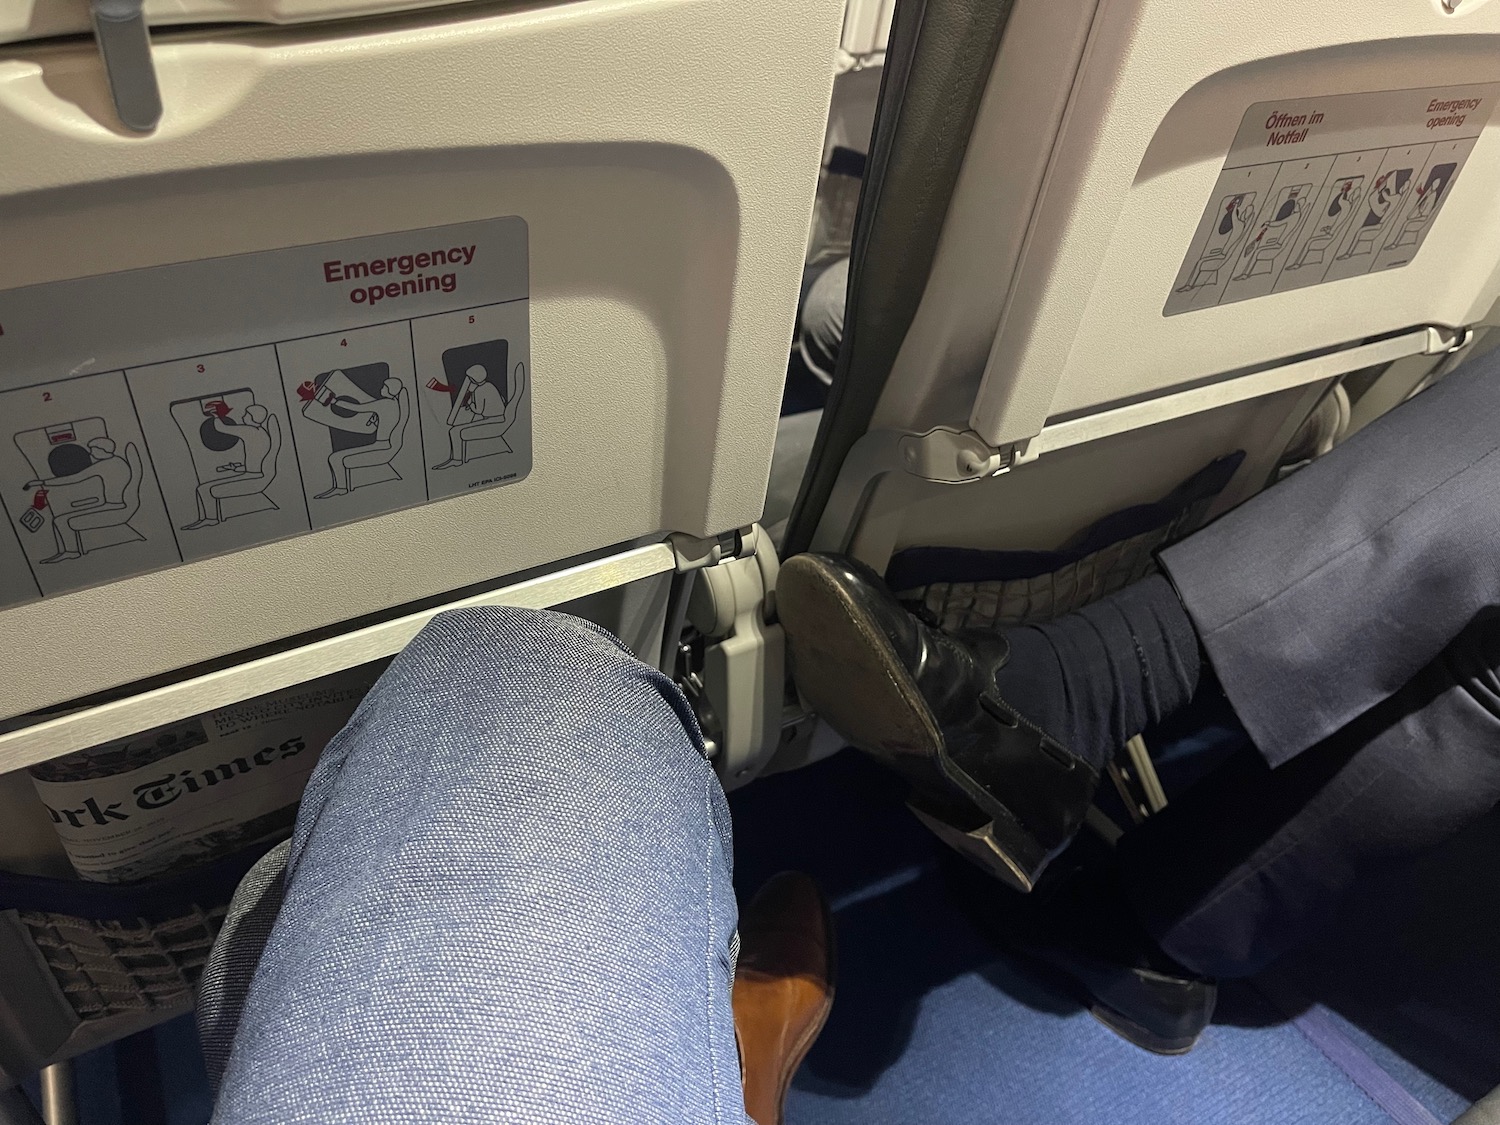 a person's legs and feet in an airplane